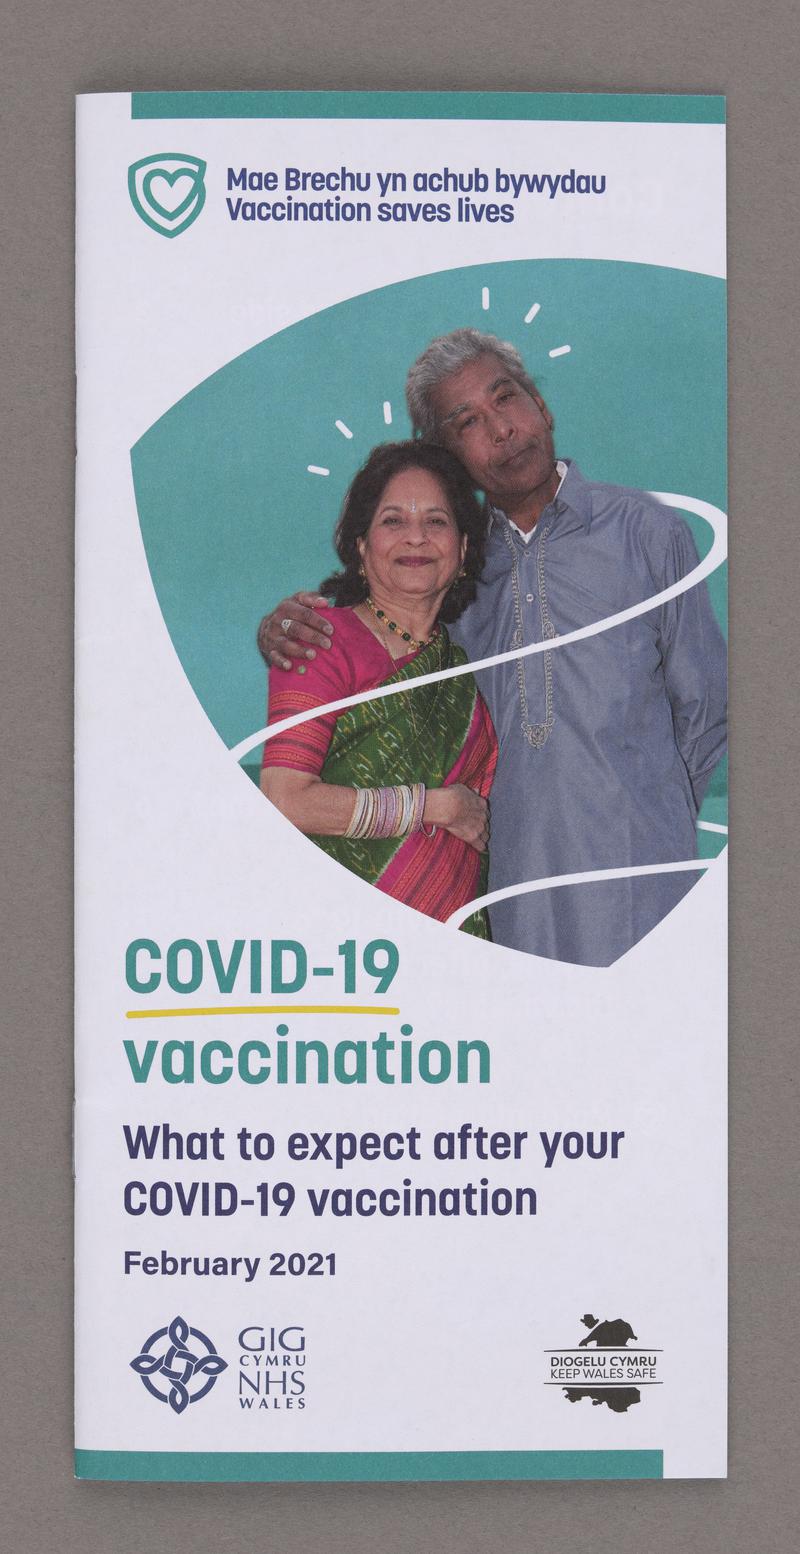 NHS Wales booklet 'COVID-19 vaccination. What to expect after your COVID-19 vaccination', February 2021.